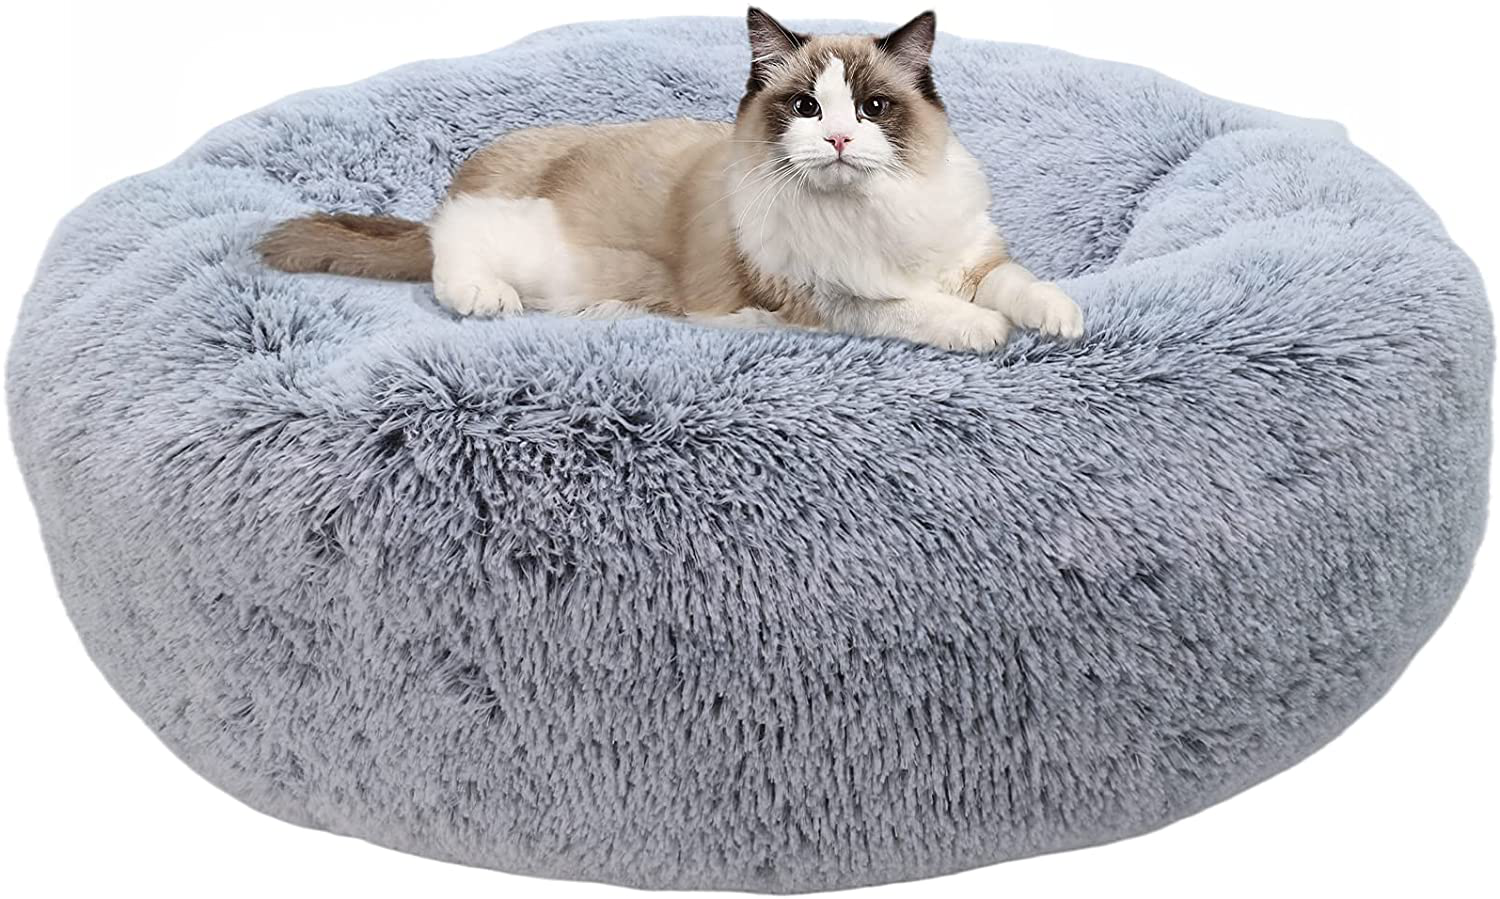 WAYIMPRESS Calming Dog Bed for Small Dog&Cat ,Comfy Self Warming round Dog Bed with Fluffy Faux Fur for anti Anxiety and Cozy Animals & Pet Supplies > Pet Supplies > Cat Supplies > Cat Beds WAYIMPRESS Light Grey small 20 x 20 Inch 